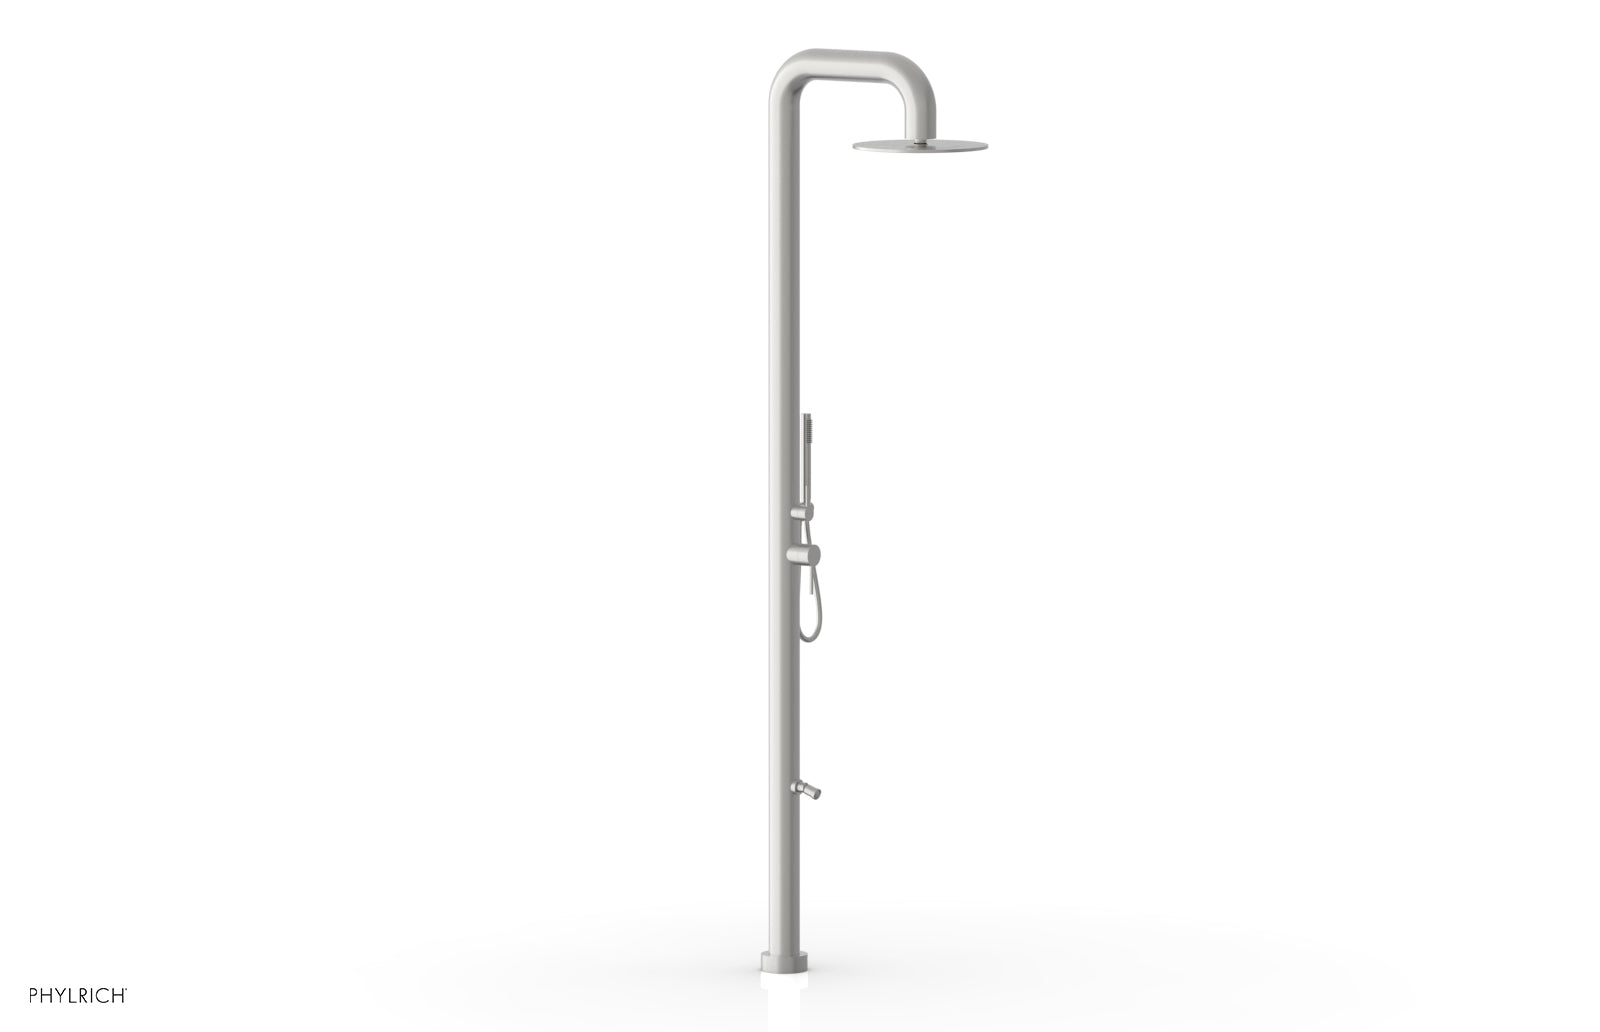 Phylrich OUTDOOR SHOWER Pressure Balance Shower with 12" Rain Head, Hand Shower and Foot Wash